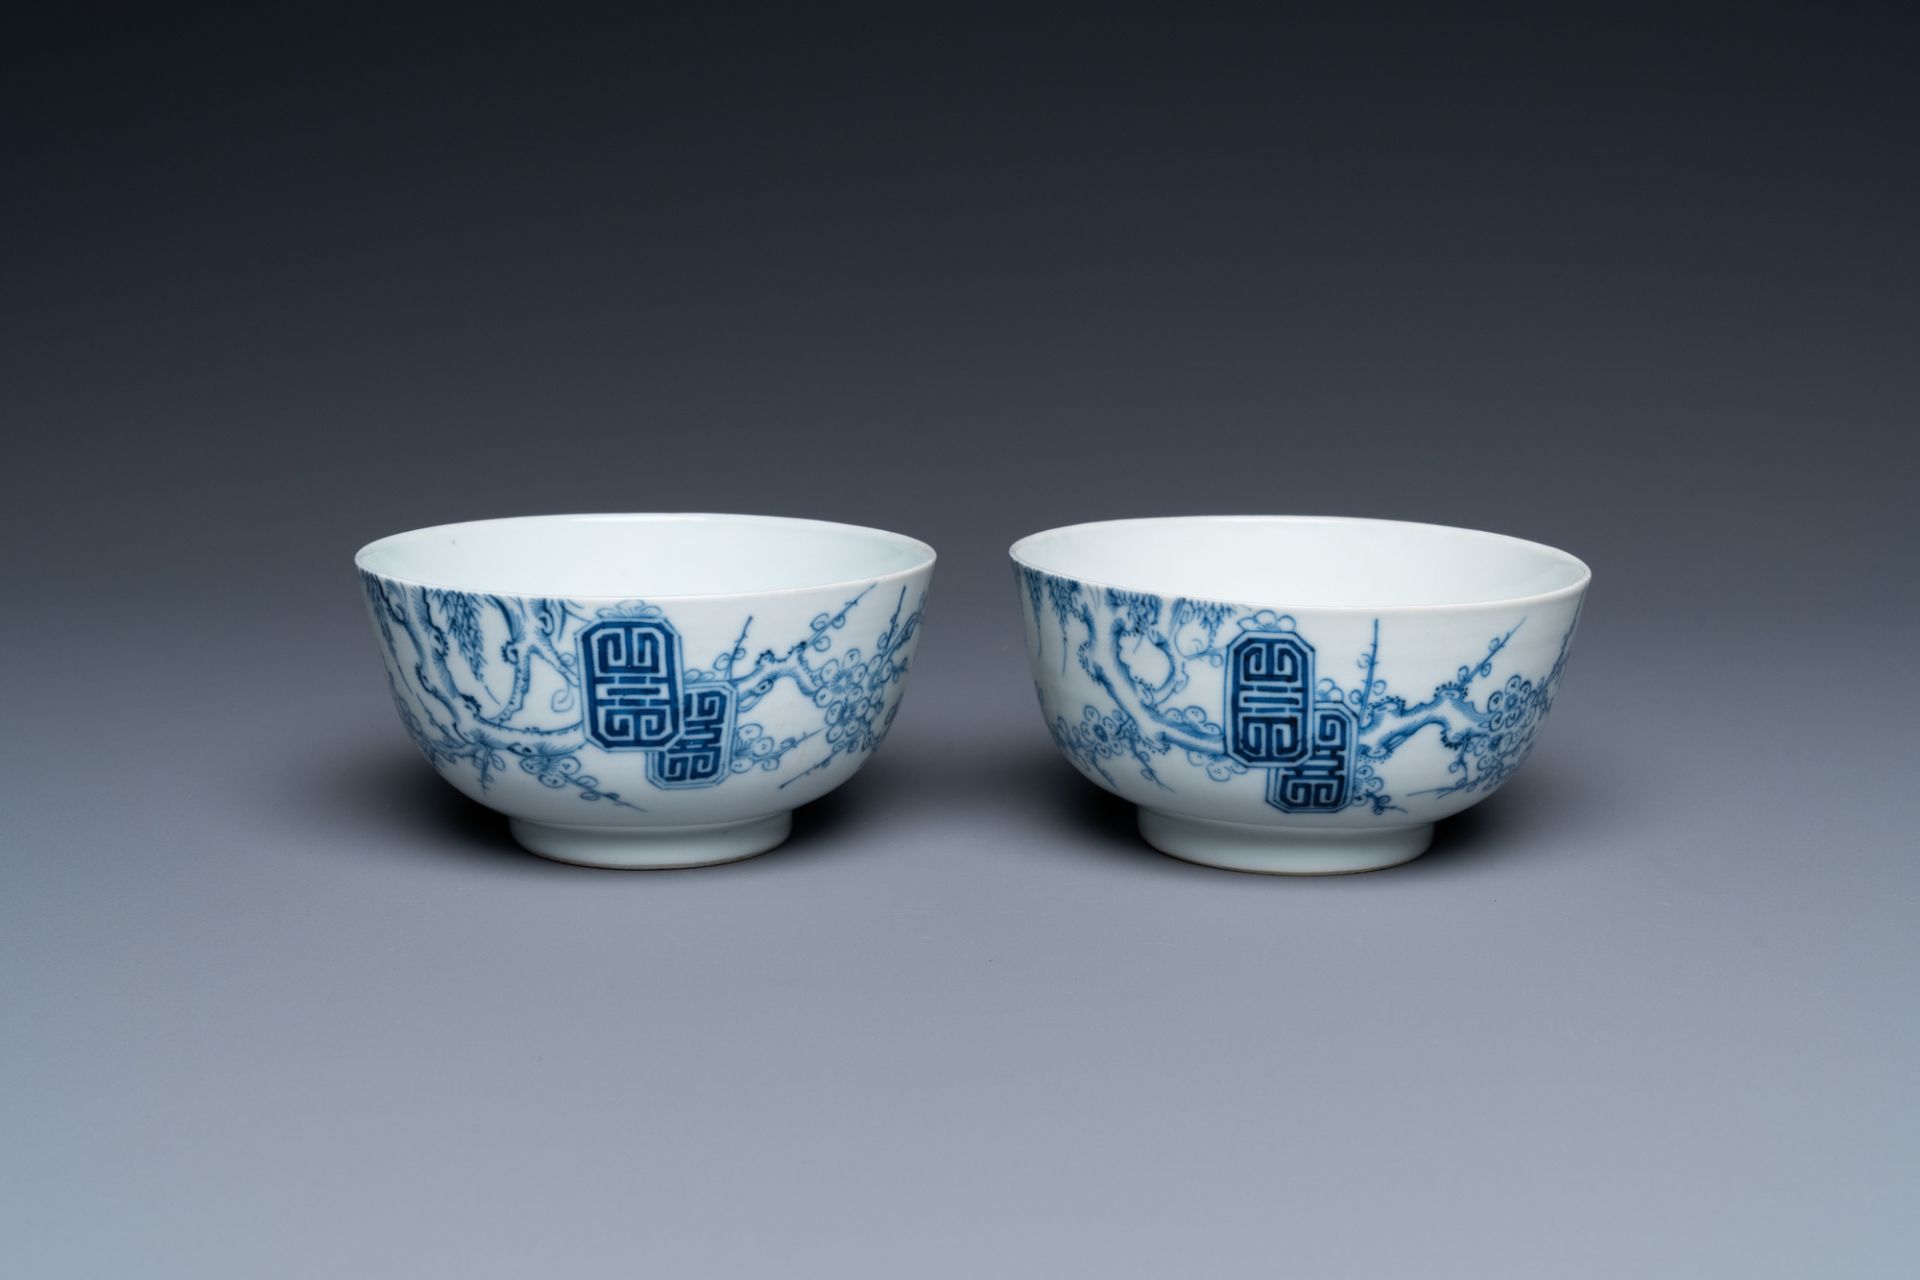 A pair of Chinese 'Bleu de Hue' bowls for the Vietnamese market, 'Roushen collection' mark, 19th C. - Image 2 of 8